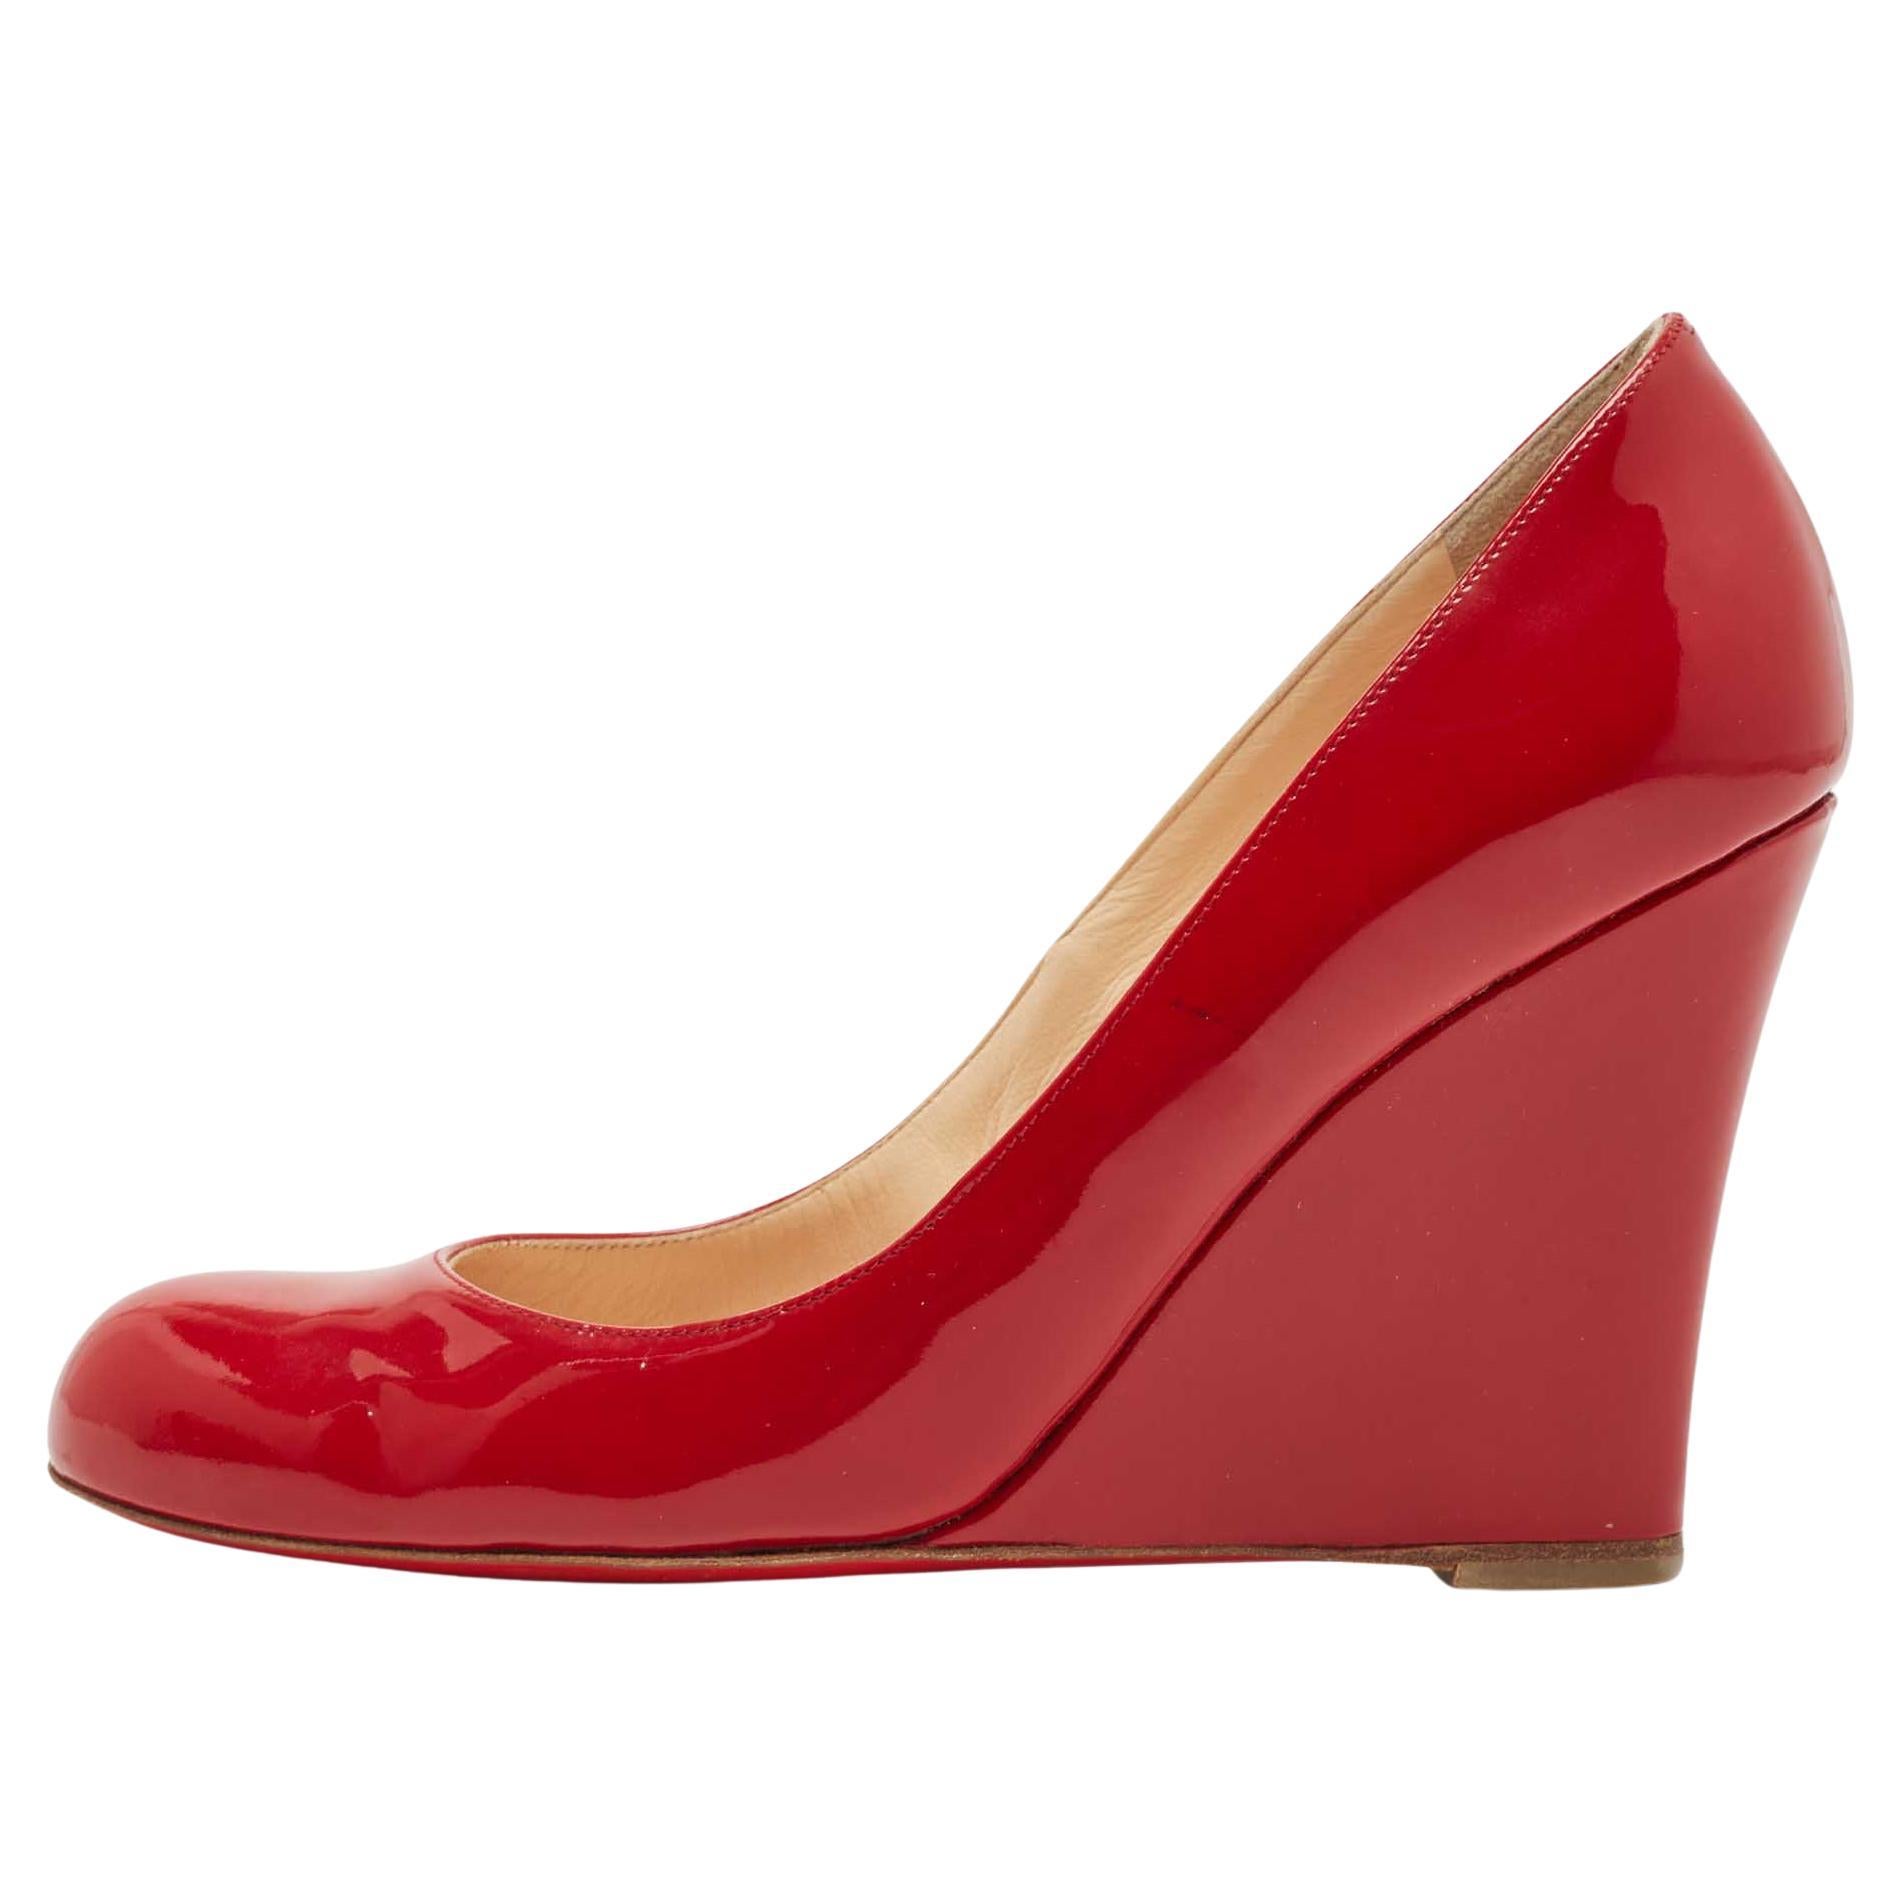 Christian Louboutin Red Patent RonRon Zeppa Wedge Pumps Size 39